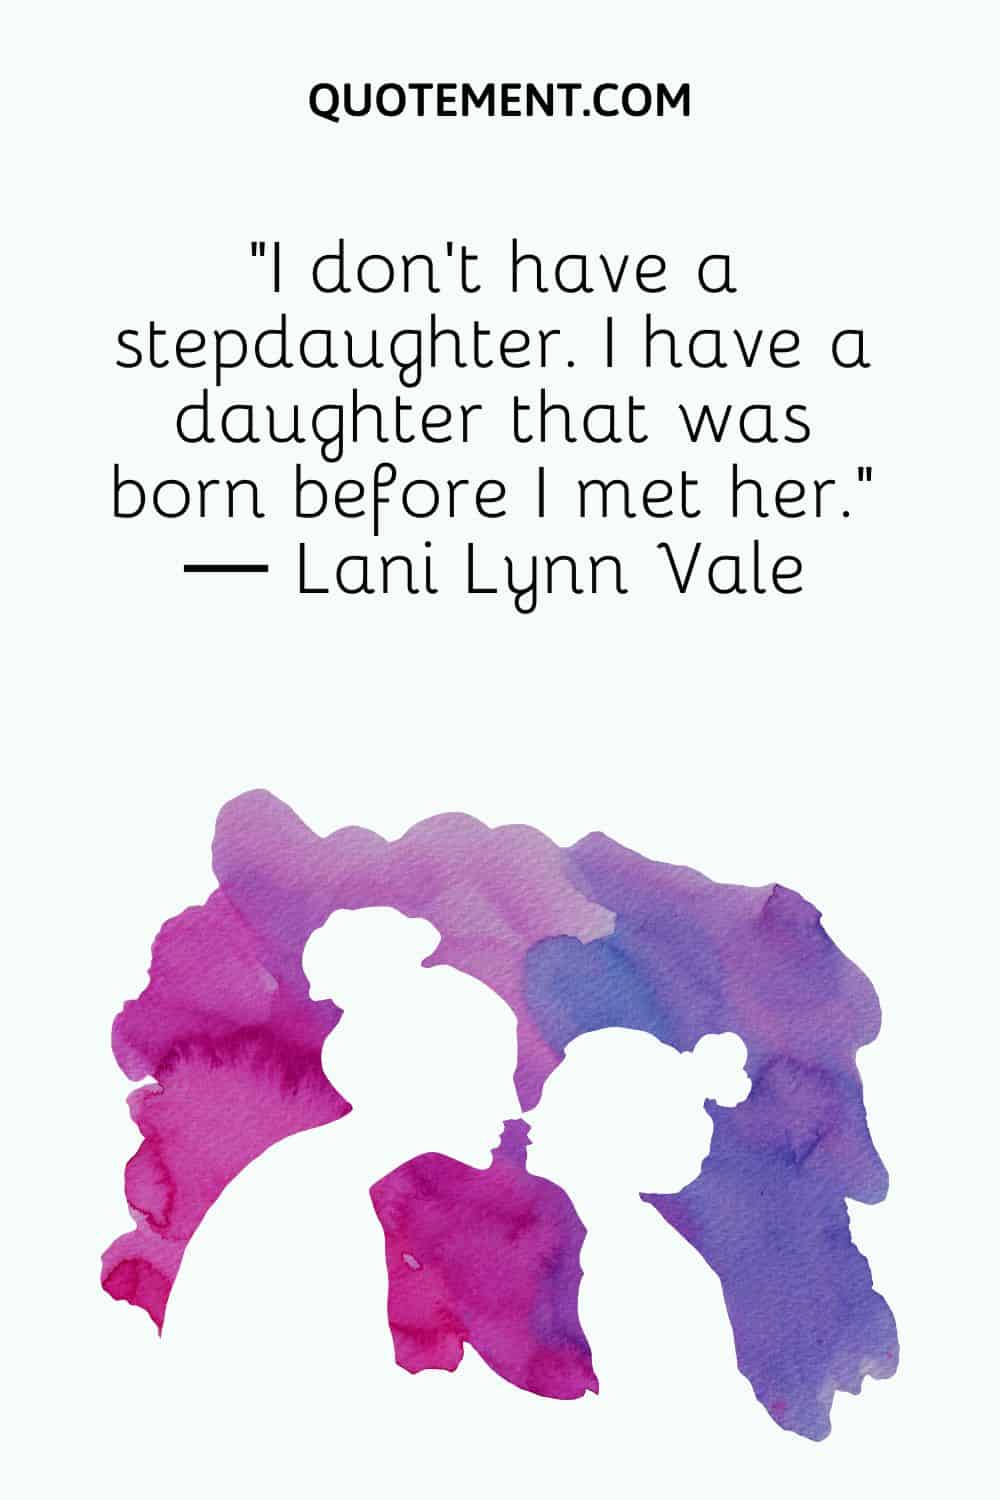 I don’t have a stepdaughter. I have a daughter that was born before I met her